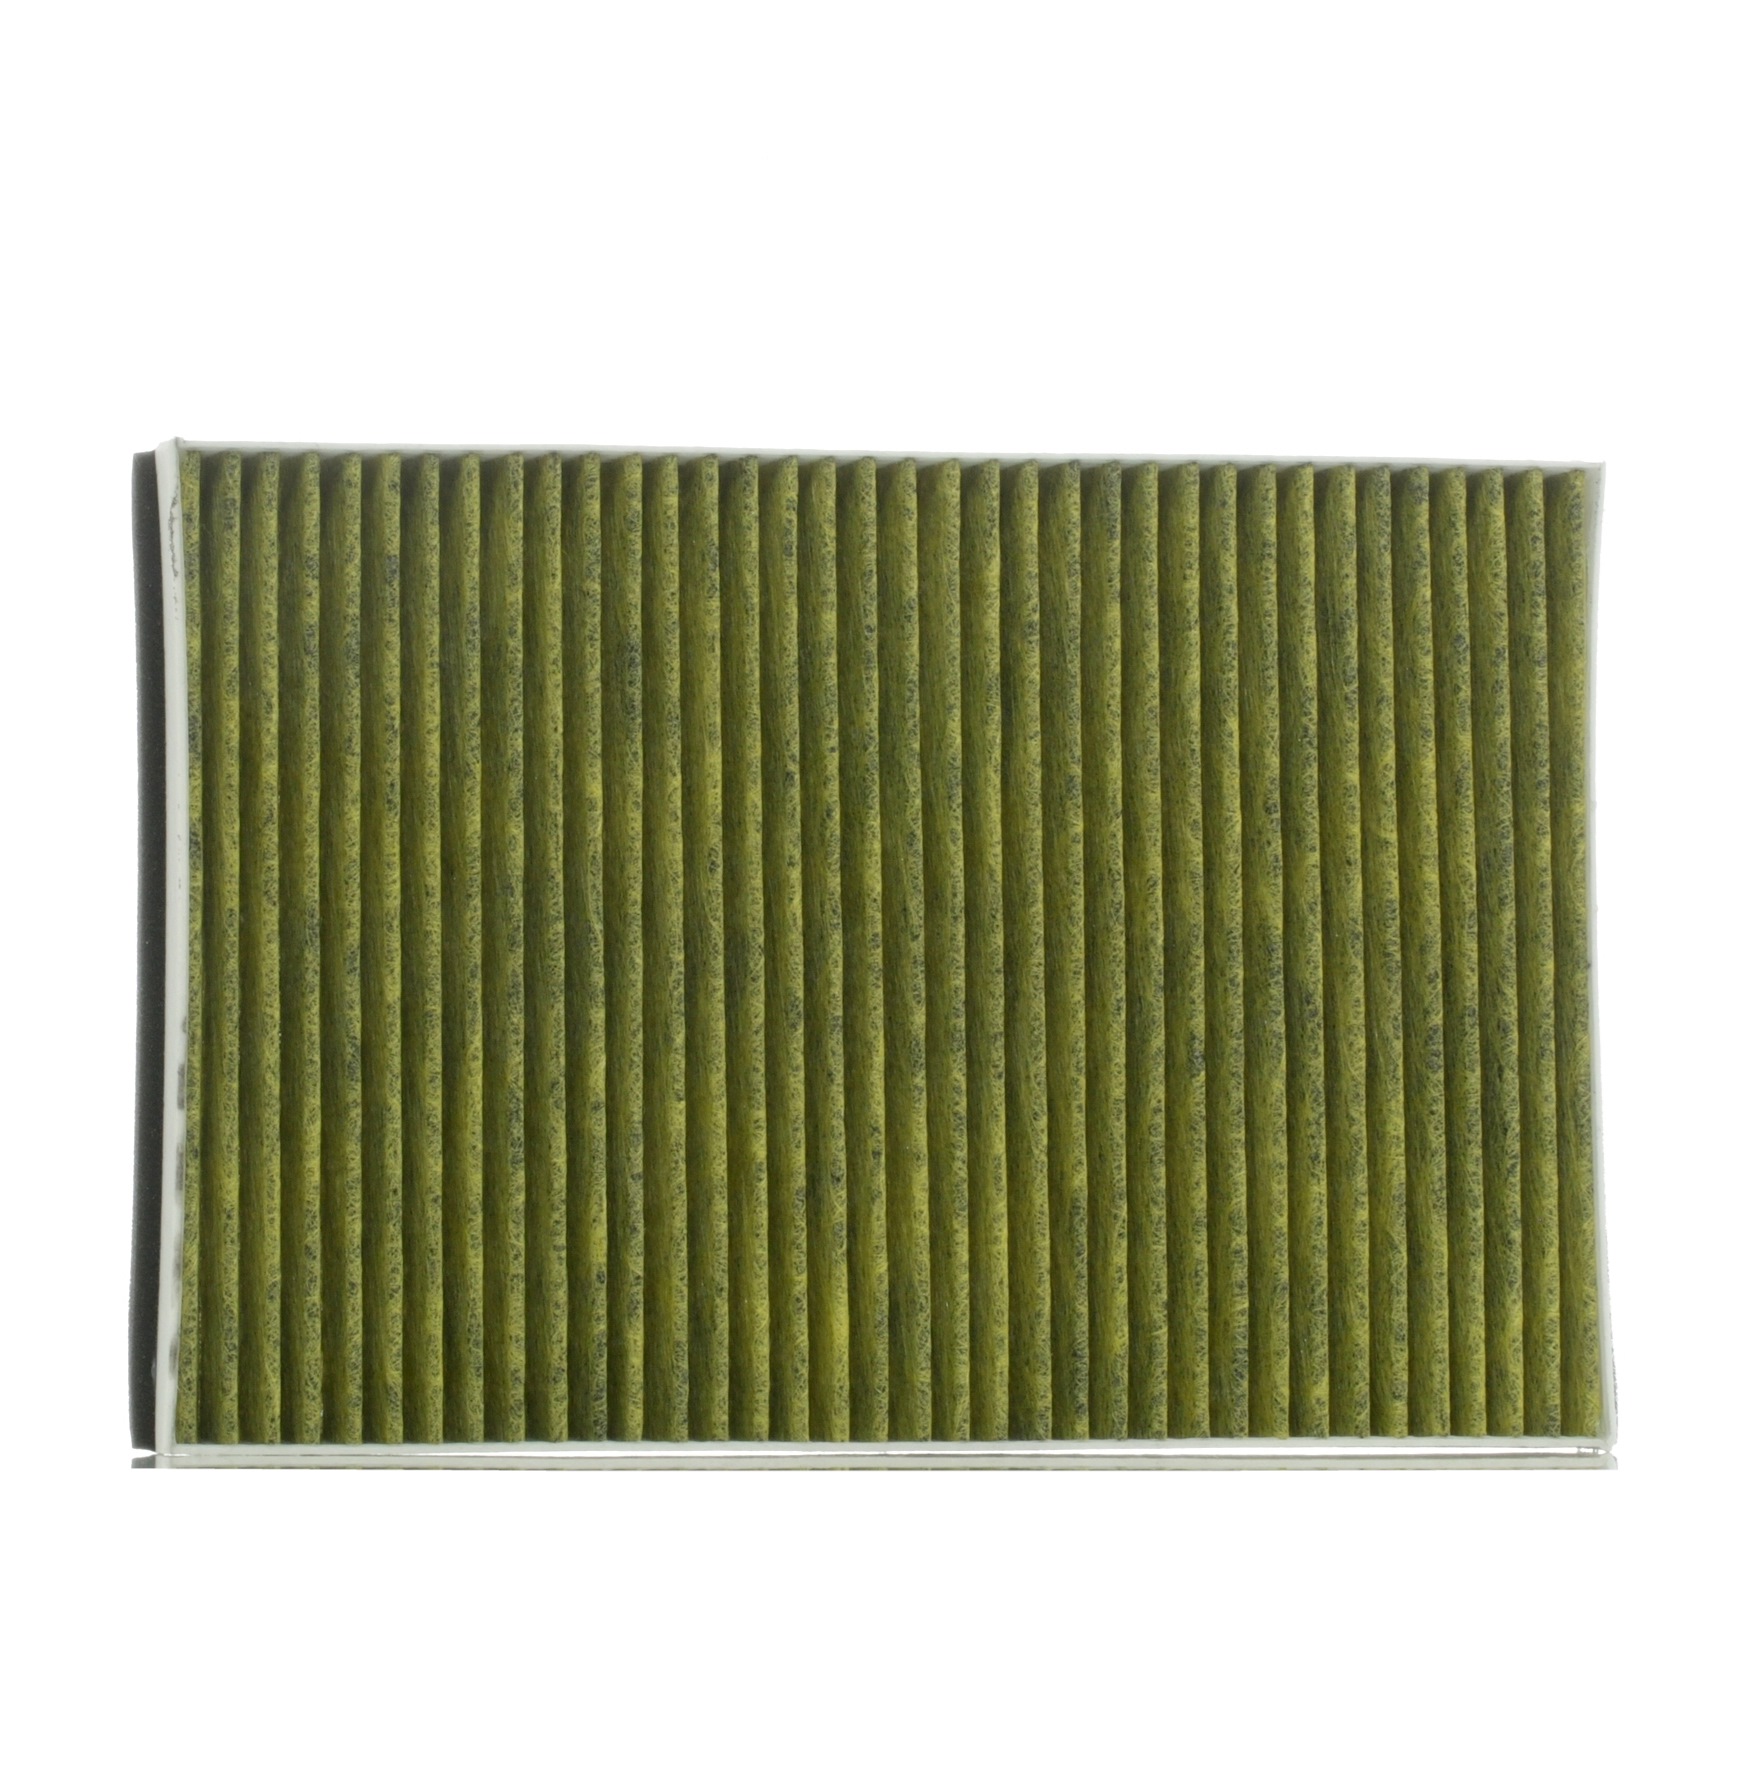 KAMOKA 6080030 Pollen filter Fresh Air Filter, Activated Carbon Filter, Particulate filter (PM 2.5), with antibacterial action, with anti-allergic effect, with fungicidal effect, with Odour Absorbent Effect, 302 mm x 199 mm x 31 mm